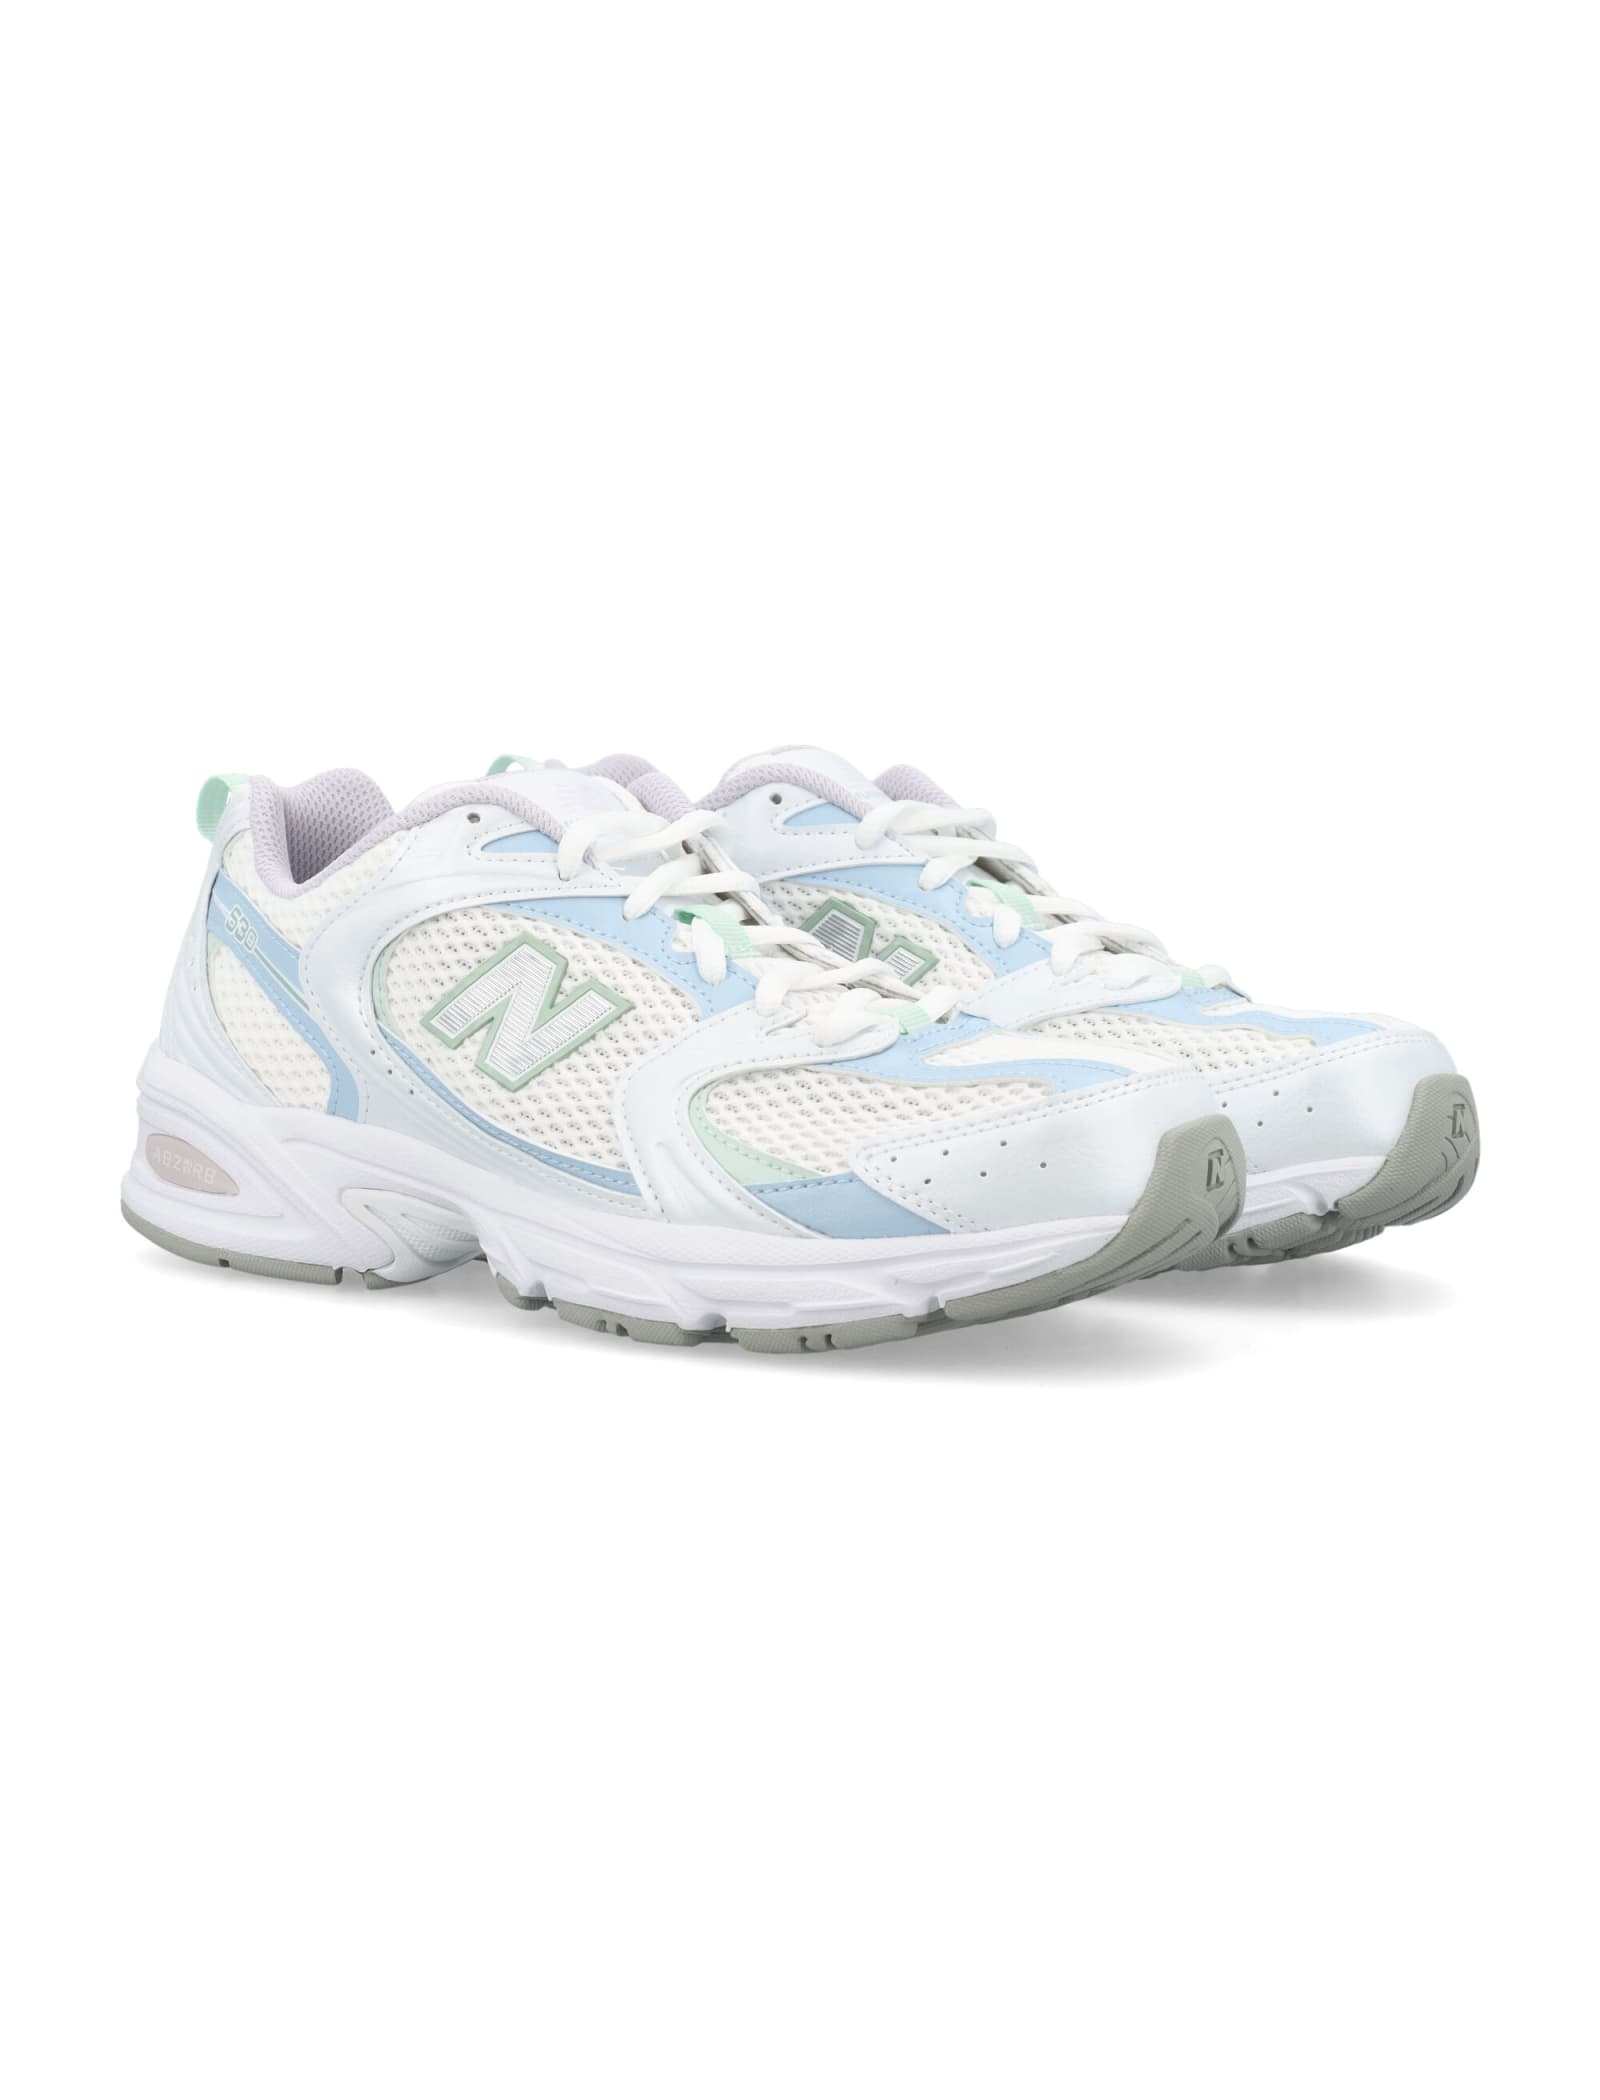 Shop New Balance 530 Sneakers In White/light Blue